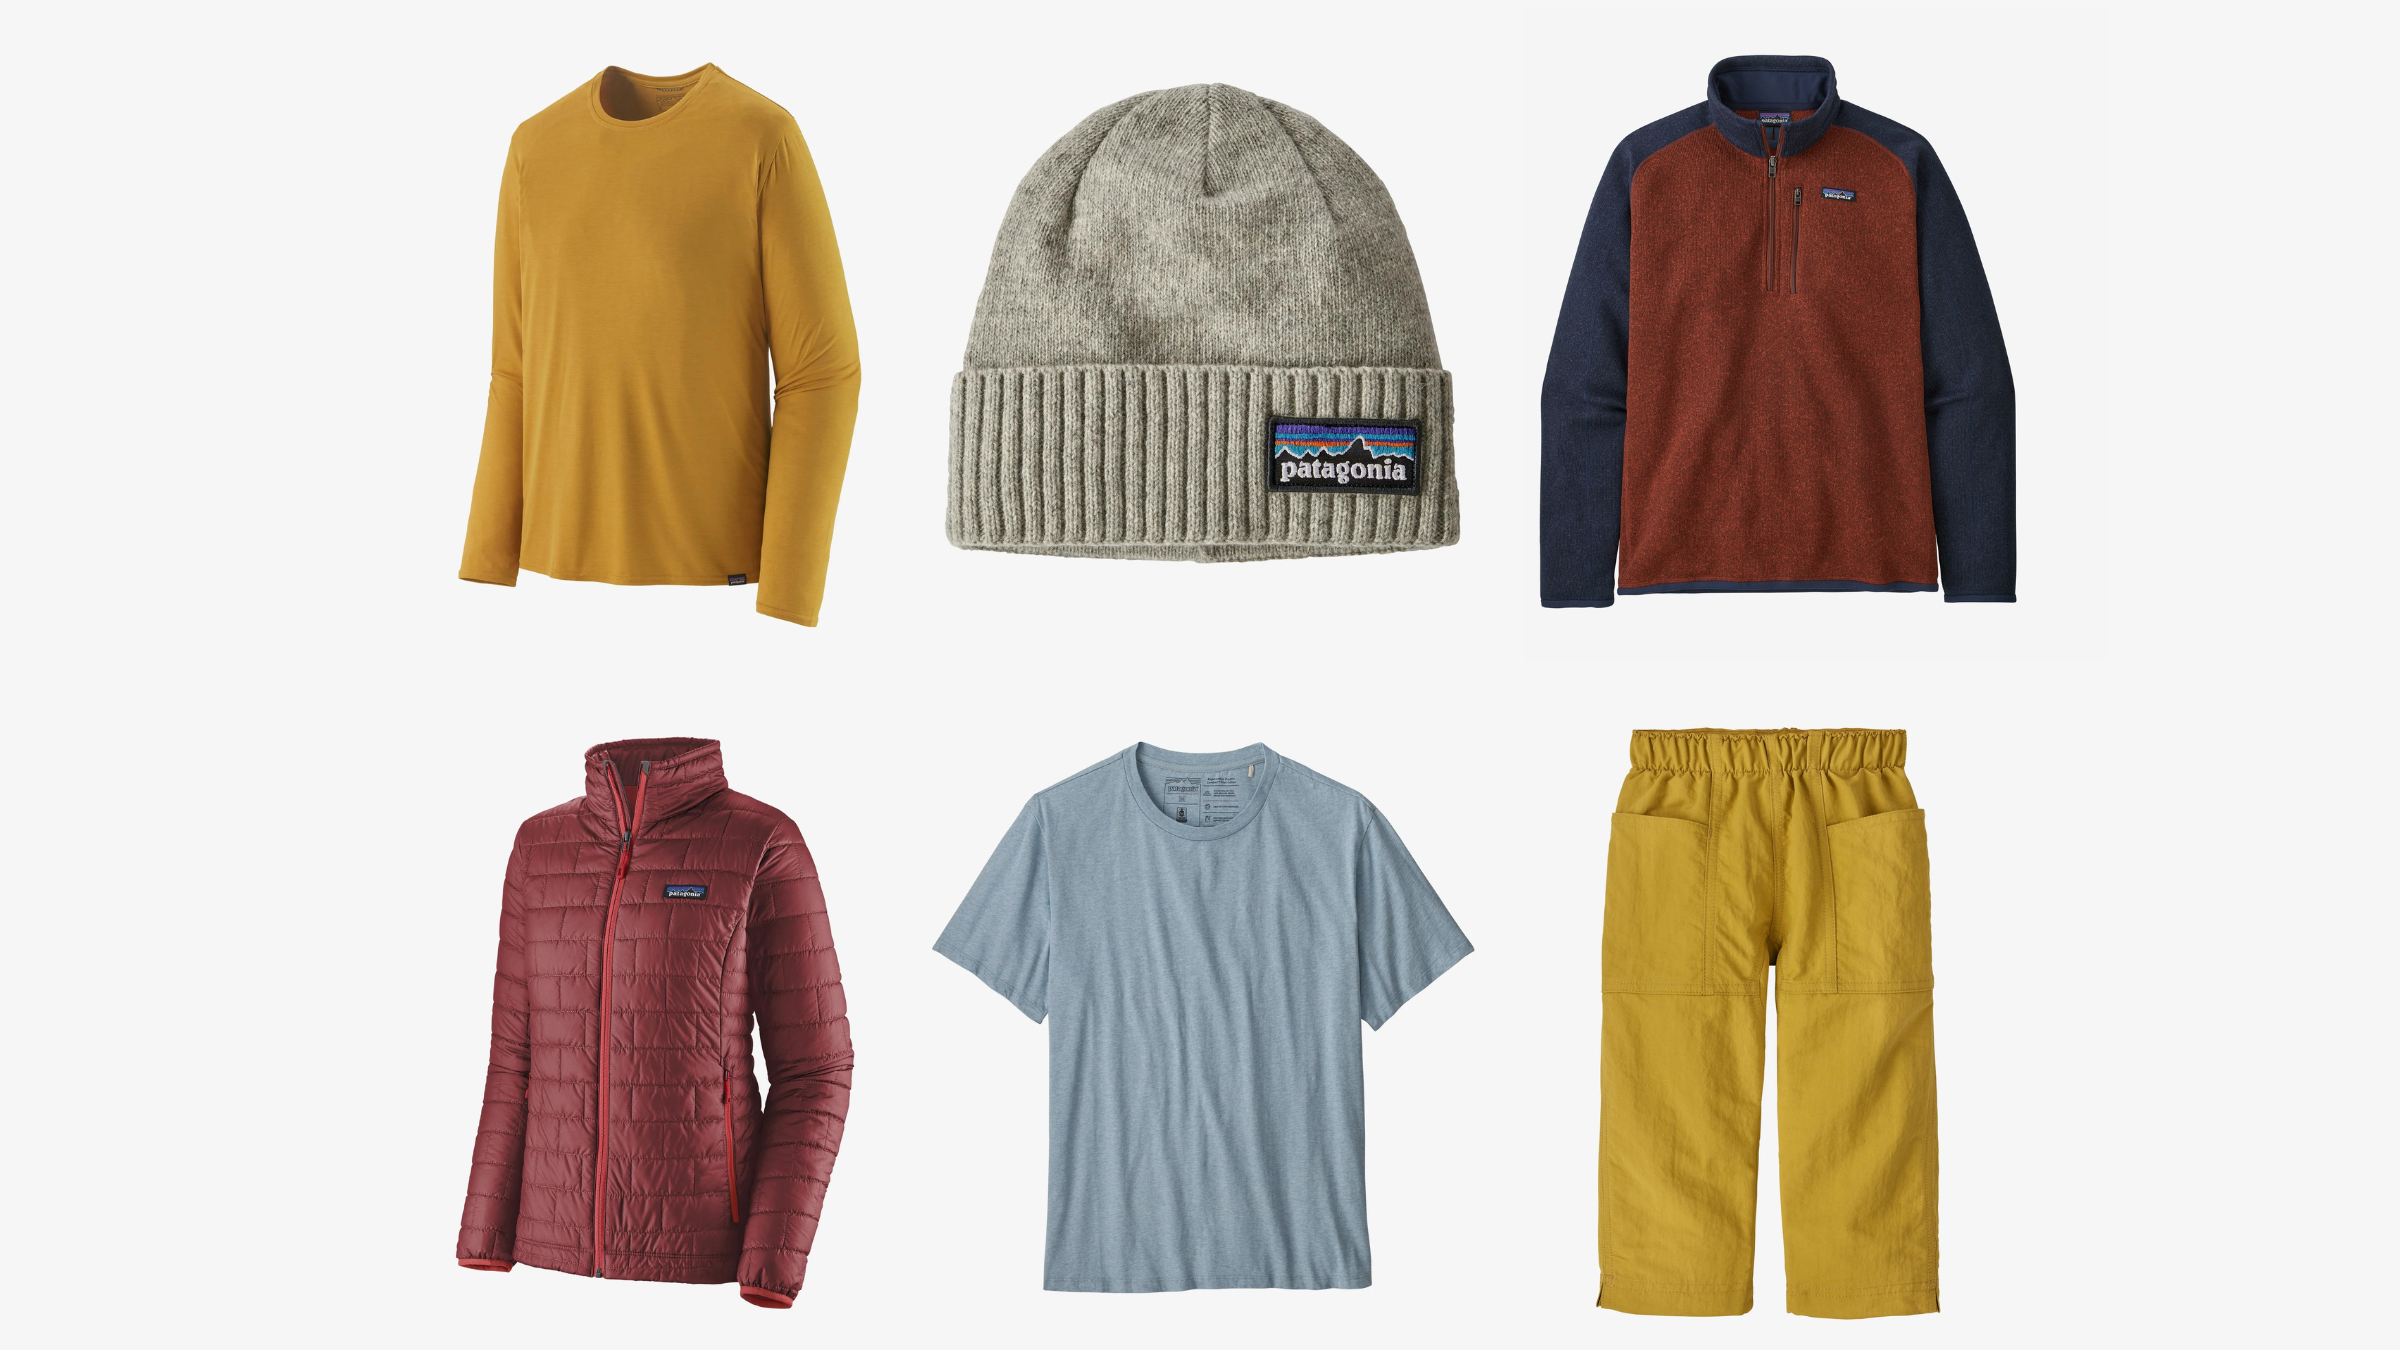 Organic Cotton Clothing: Eco-Friendly Clothing by Patagonia